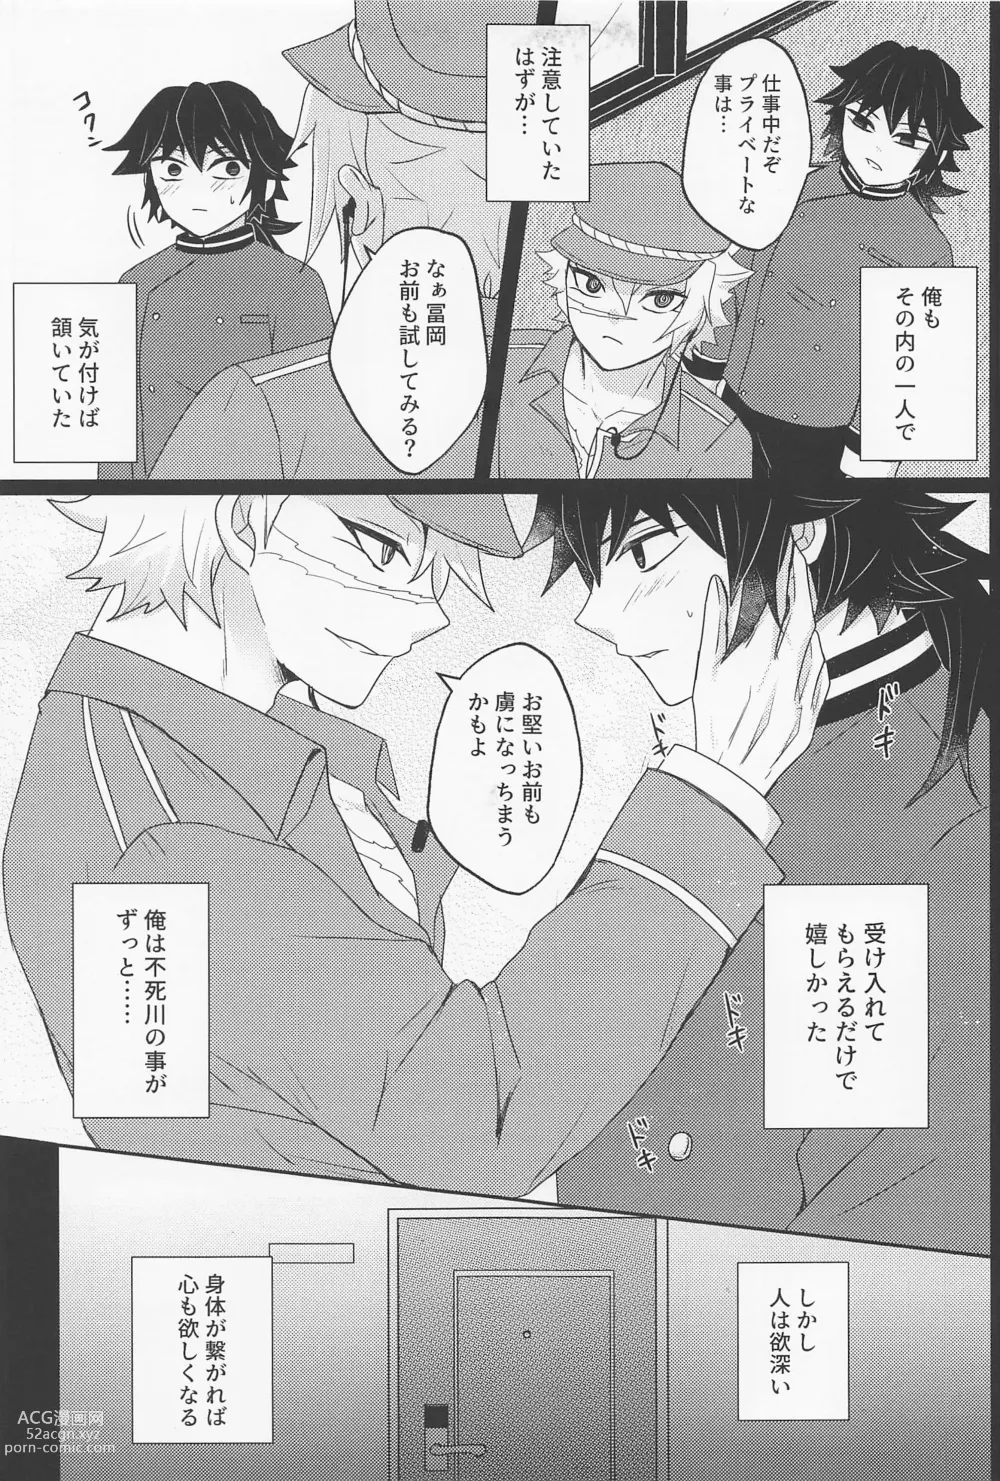 Page 10 of doujinshi Its all up to you